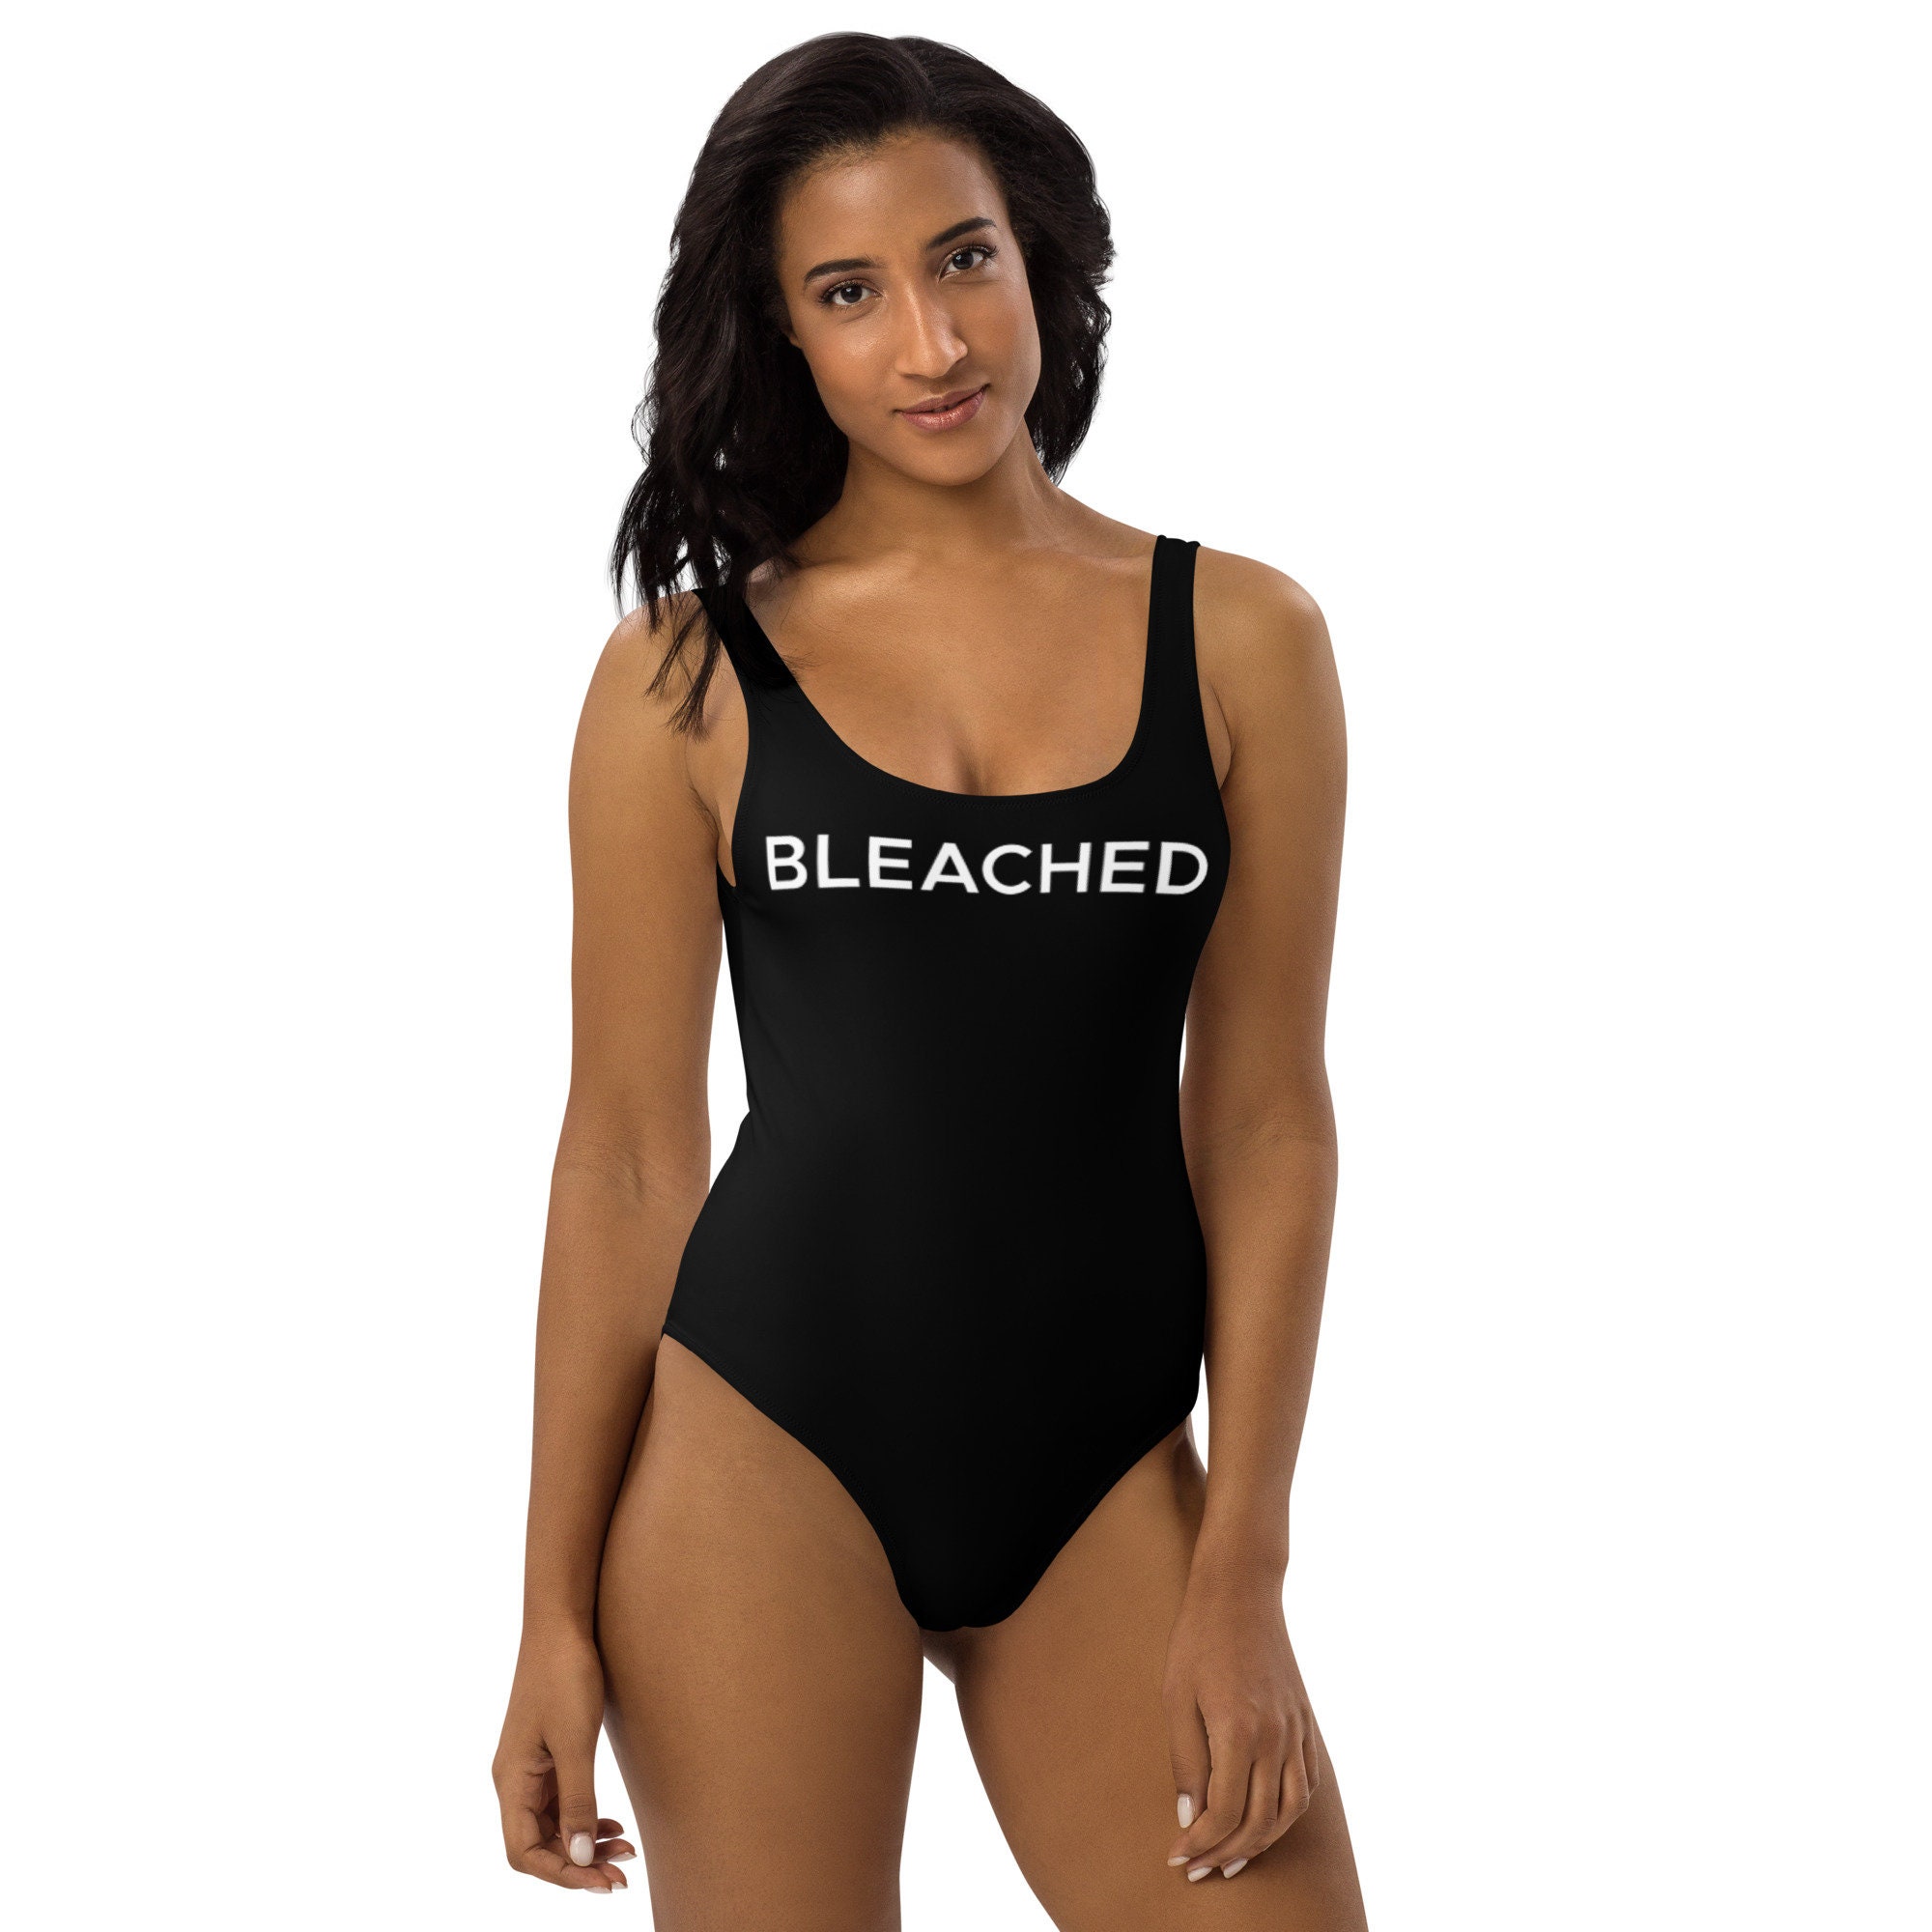 Bleached One-piece Swimsuit, Queen of Hearts Swimsuit, QOH